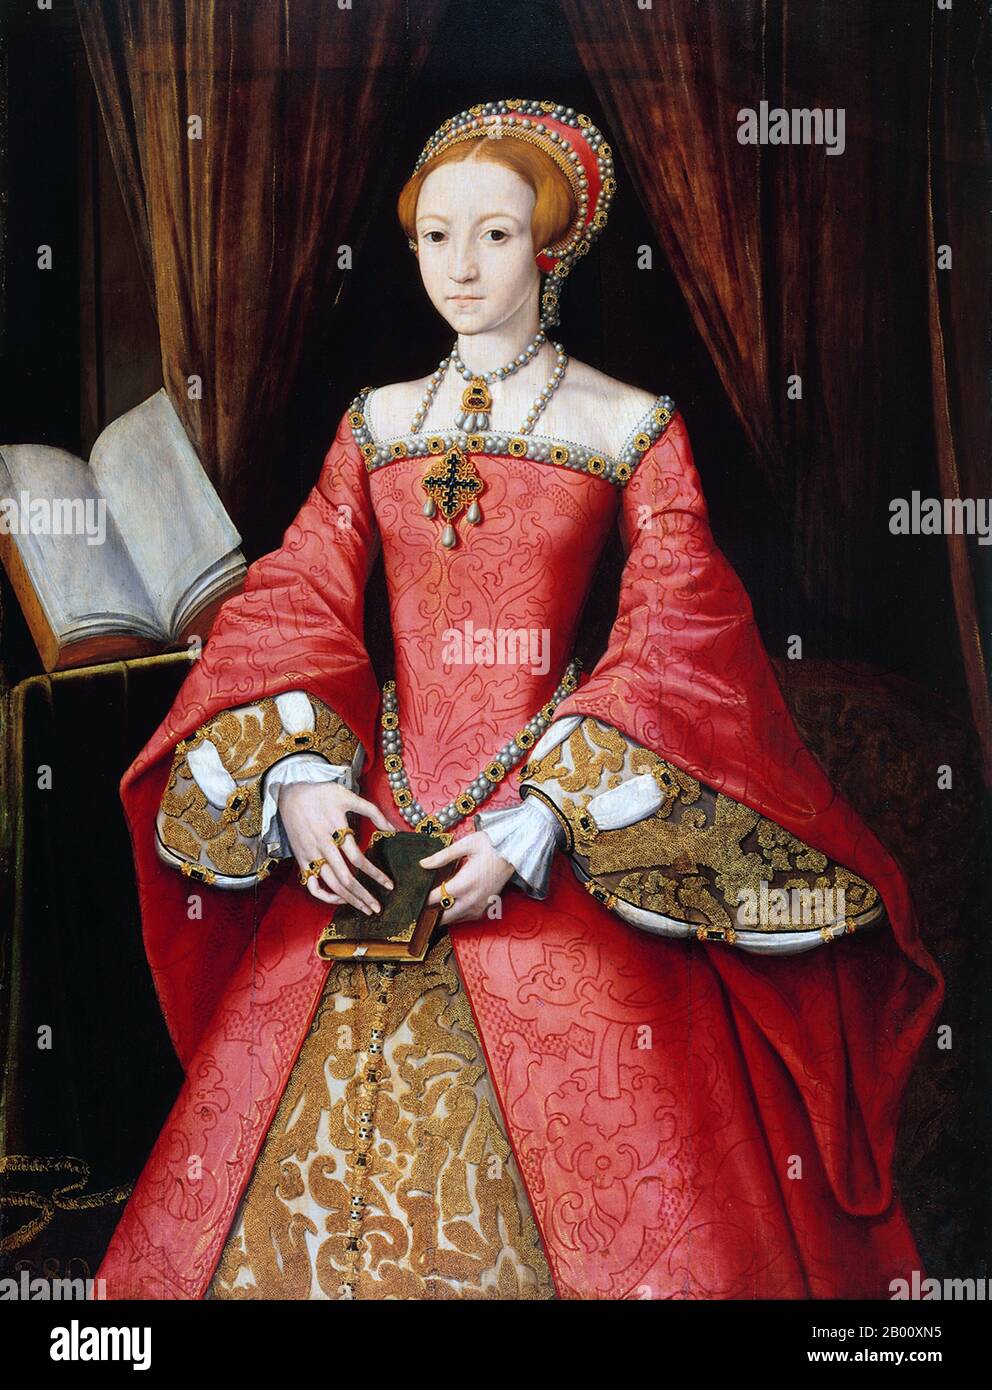 England: 'Elizabeth I when a Princess'. Oil on panel painting attributed to William Scrots (1537-1553), c. 1546-1547.  Elizabeth I (7 September 1533 – 24 March 1603) was Queen regnant of England and Queen regnant of Ireland from 17 November 1558 until her death. Sometimes called The Virgin Queen, Gloriana, or Good Queen Bess, Elizabeth was the fifth and last monarch of the Tudor dynasty. Elizabeth I's foreign policy with regard to Asia, Africa and Latin America demonstrated a new understanding of the role of England as a maritime, Protestant power in an increasingly global economy. Stock Photo